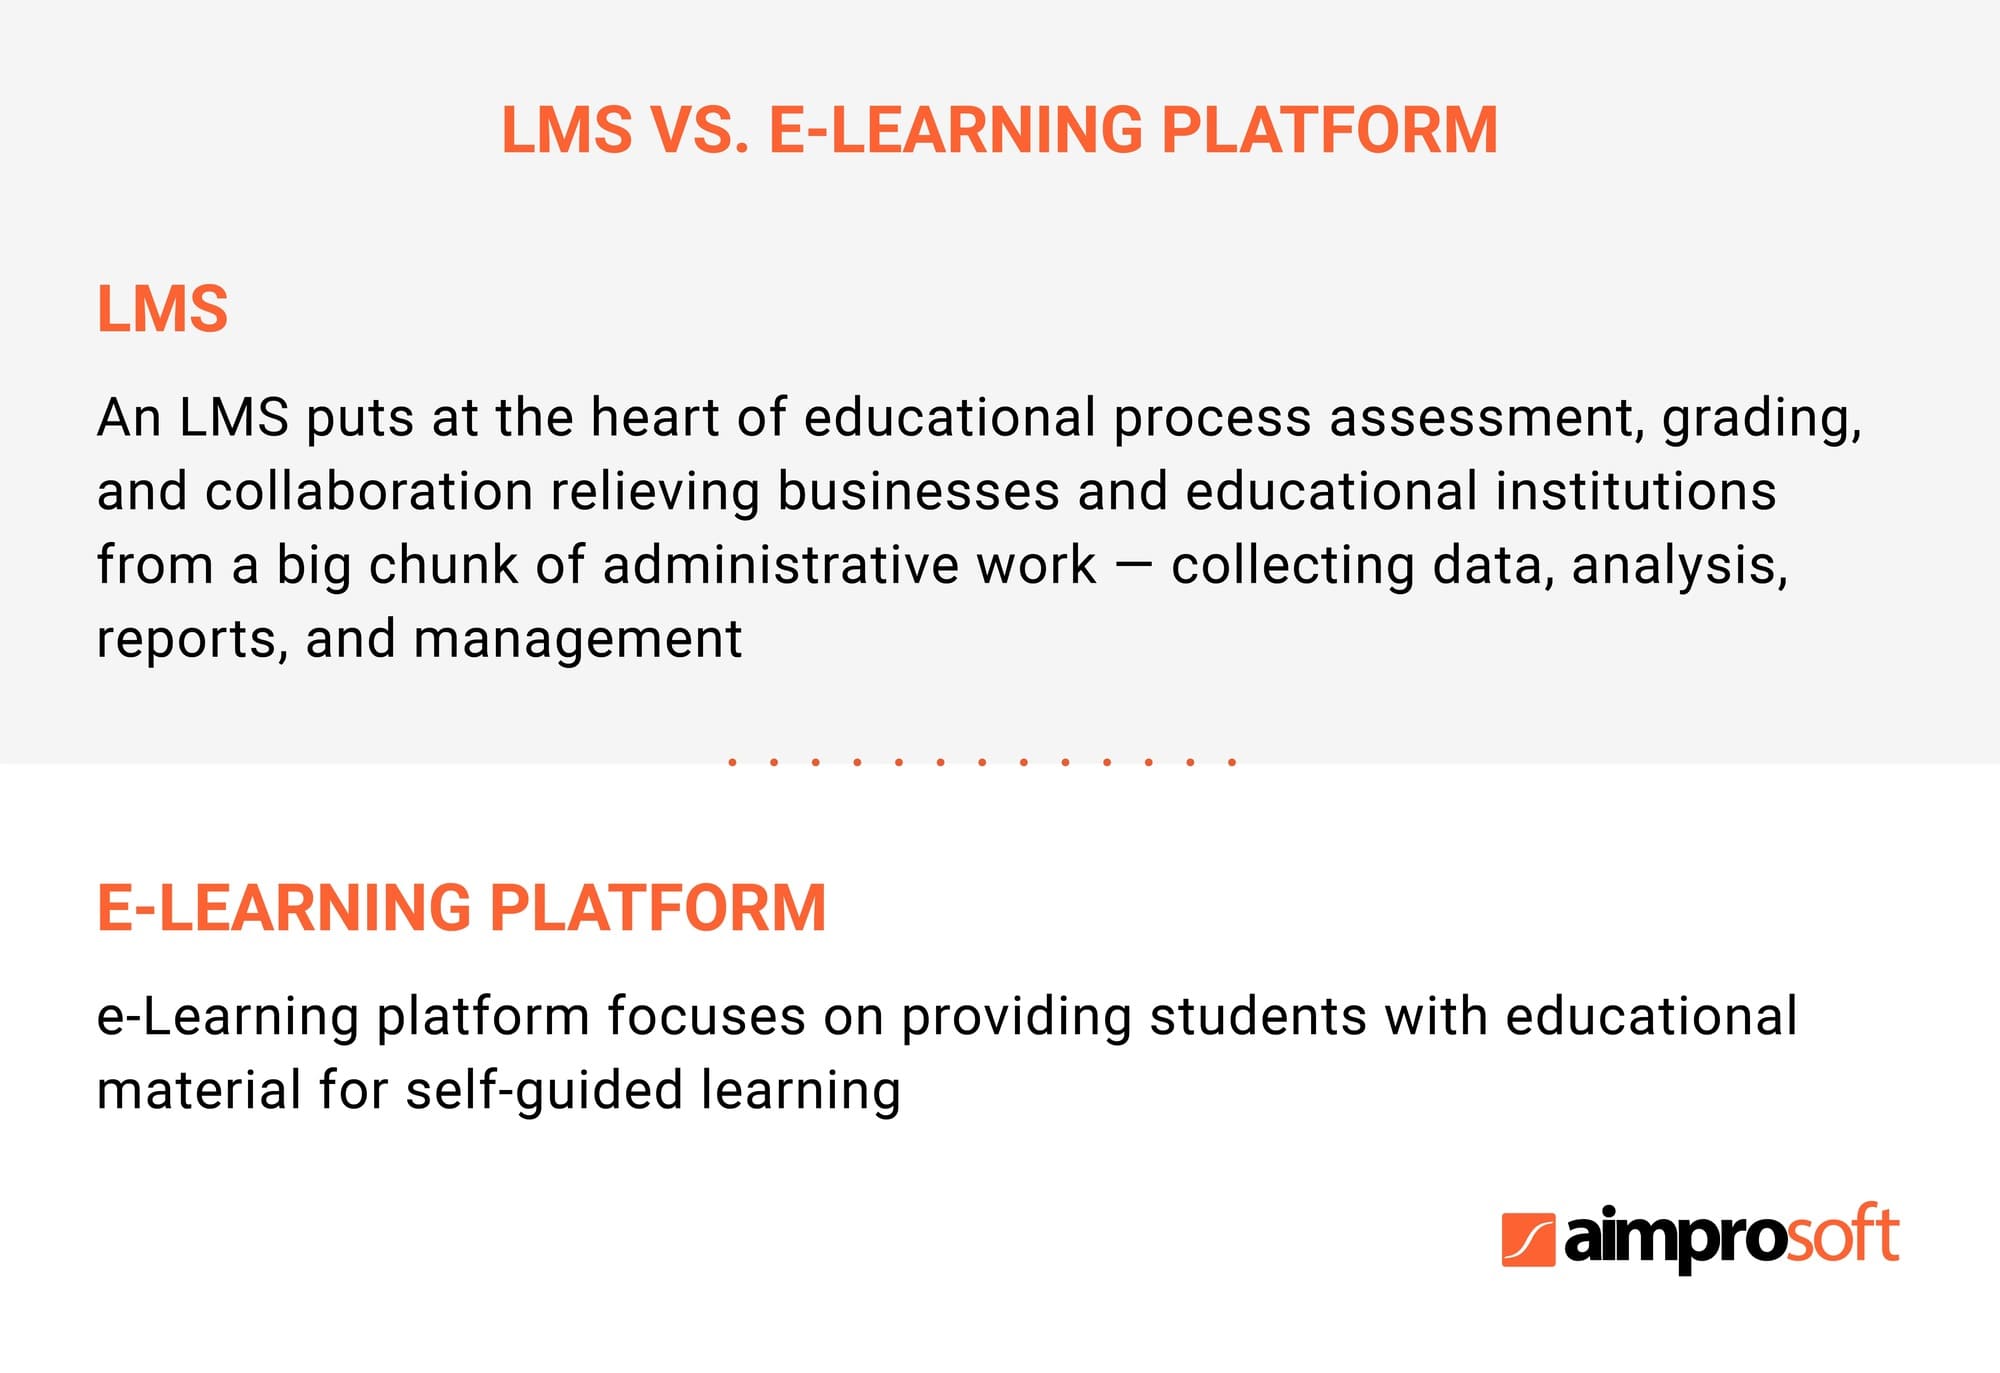 Difference between an LMS and an e-Learning platform